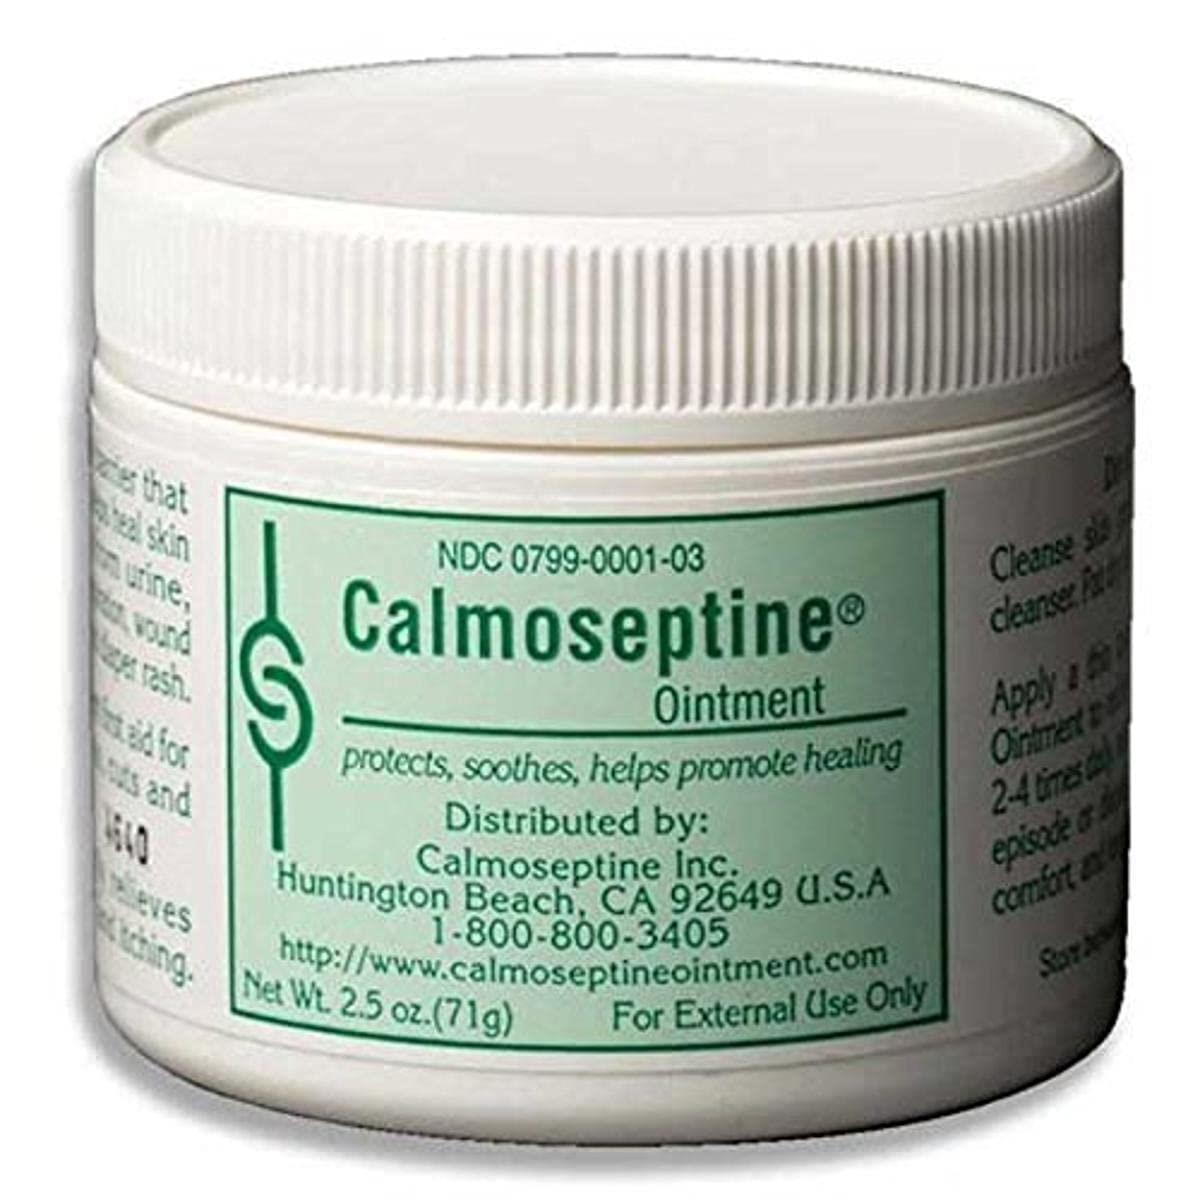 Calmoseptine Cream Skin Protectant - 2.5oz Jar Protects and Helps Heal Skin Irritations, 1/Each by Calmosepti Pack of 3